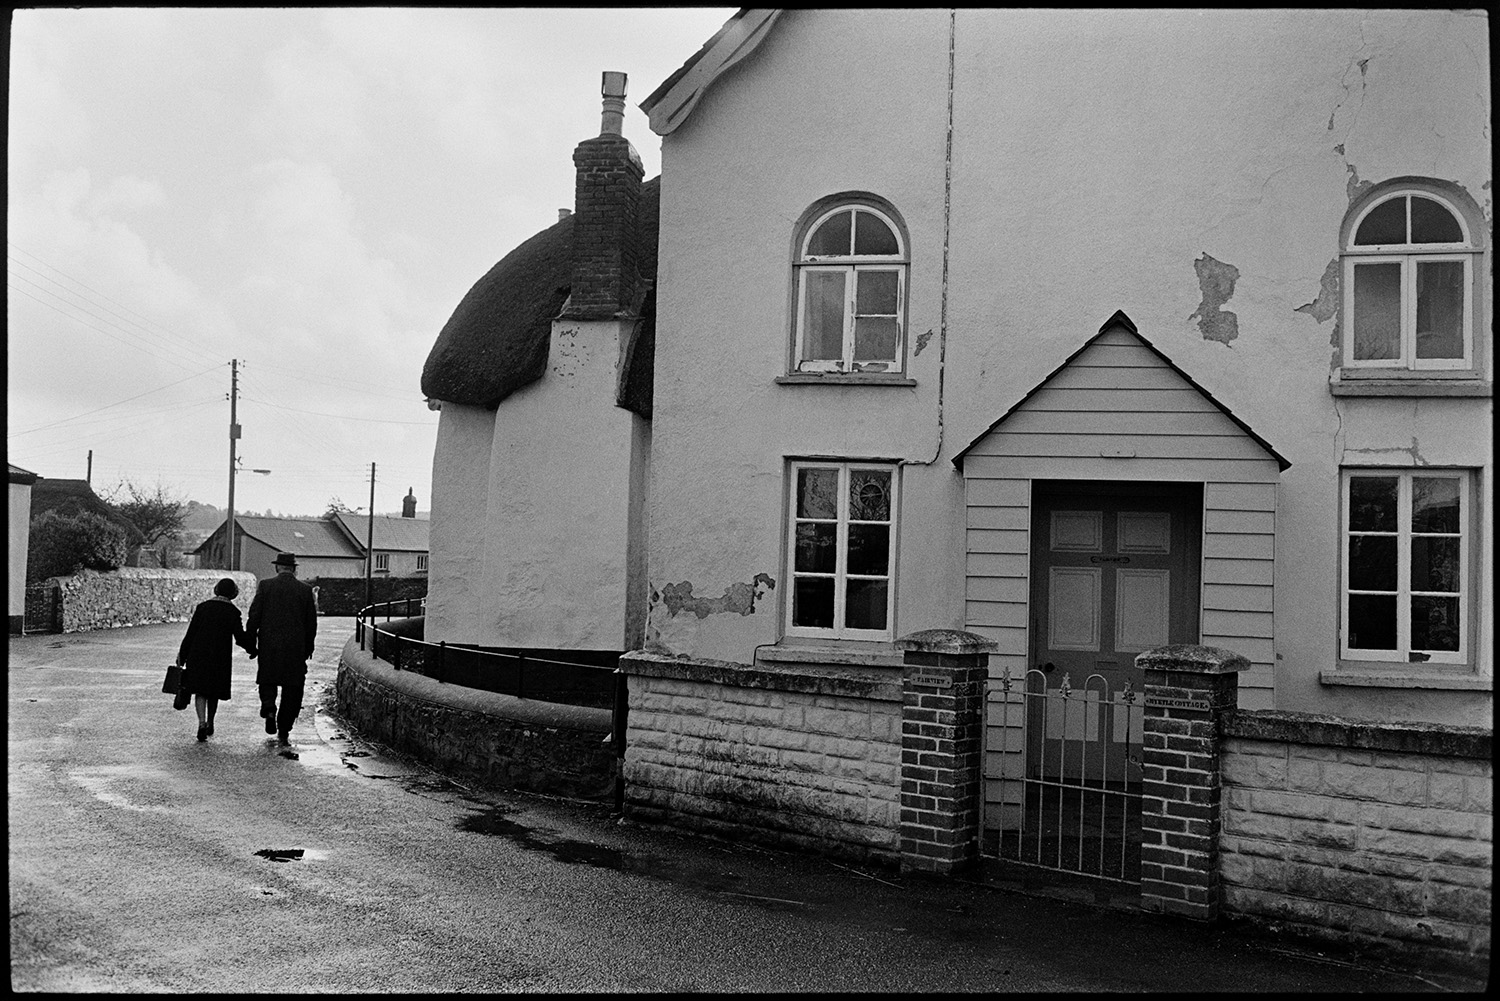 Couple walking past house with porch. 
[A man and woman walking hand in hand along West Lane, Dolton. They are passing a thatched cottage and a house with a porch.]